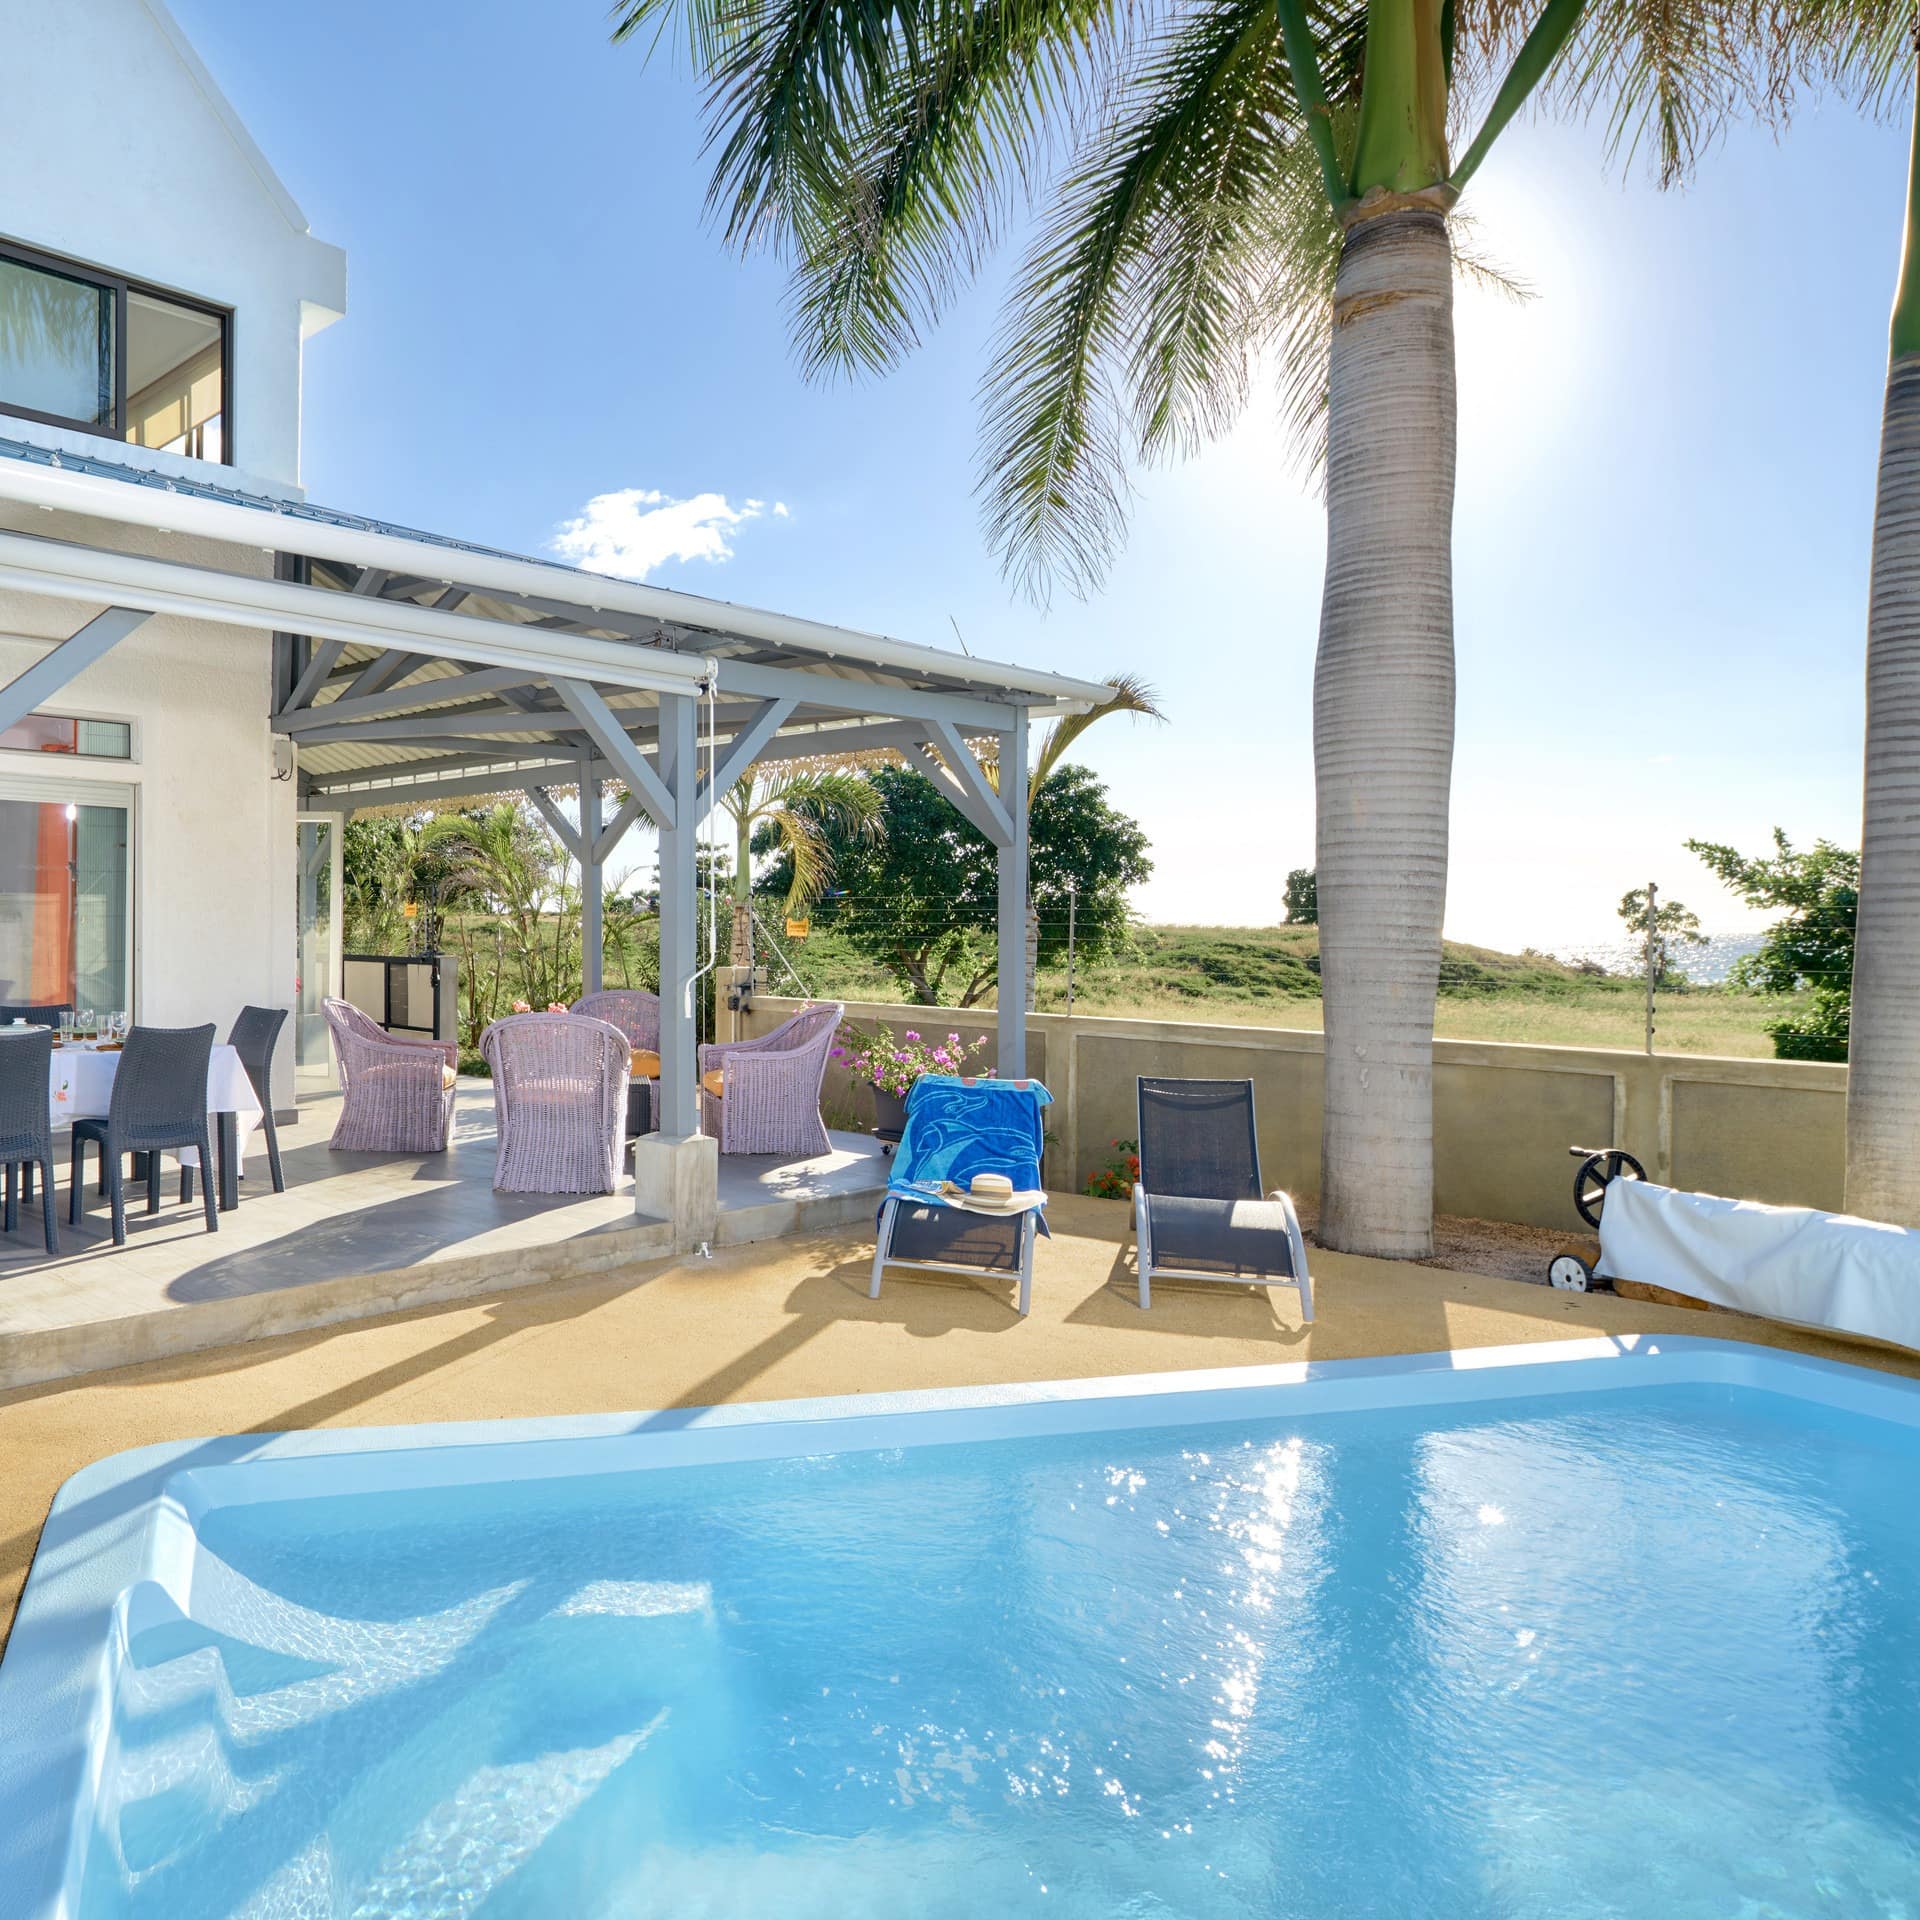 A villa in Mauritius with fat-bottomed palm trees and a swimming pool close to the coast